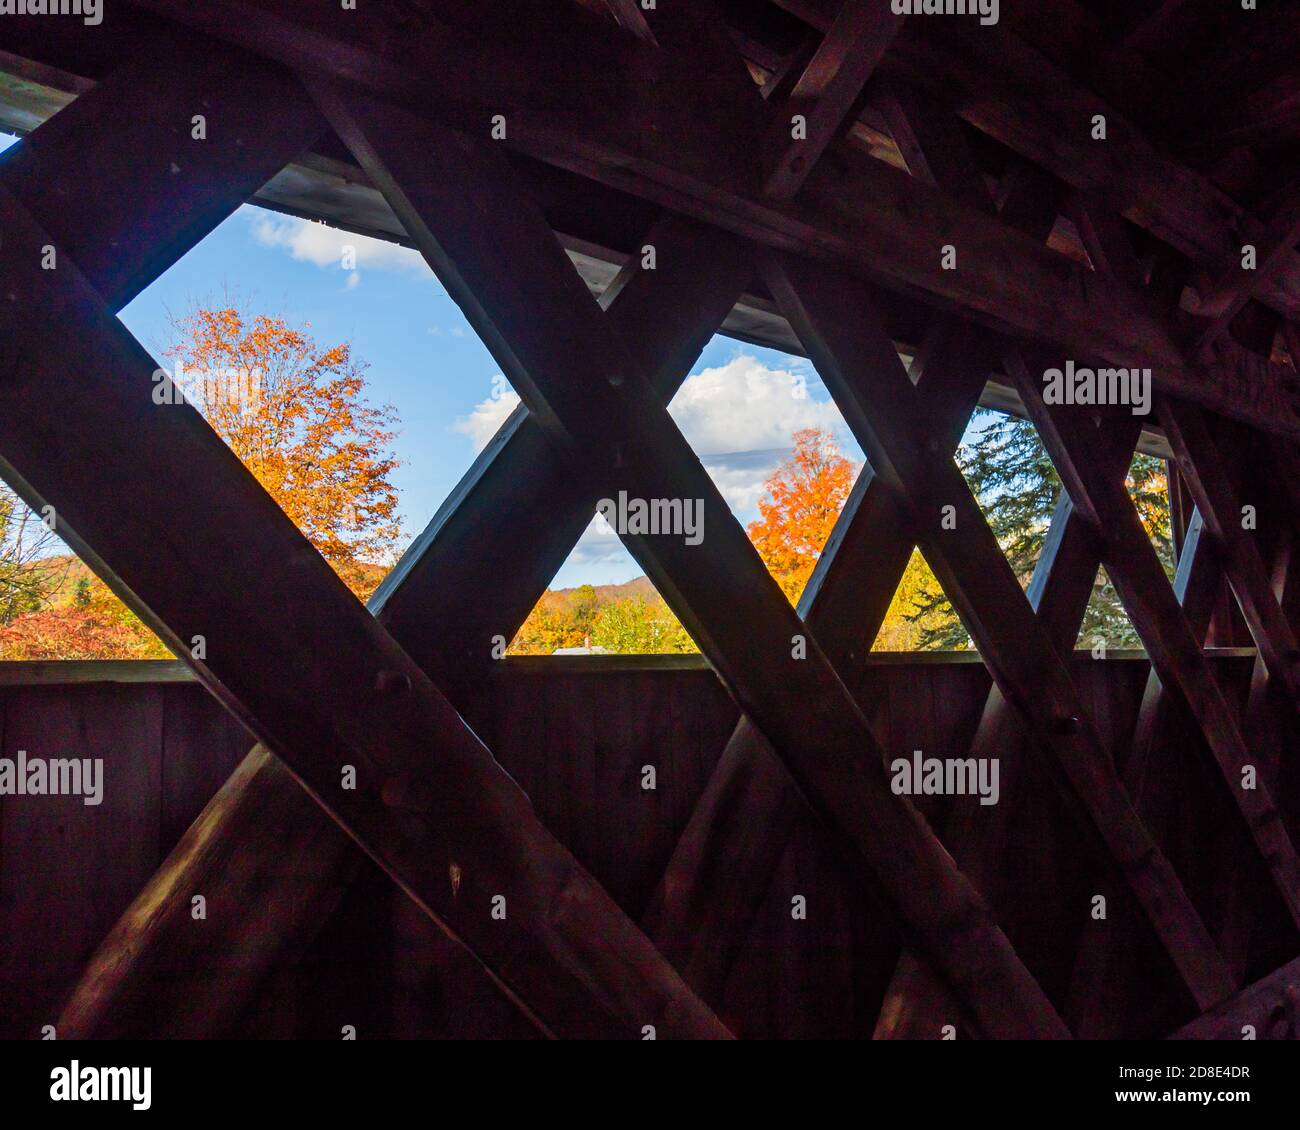 looking though the lattice wooden architecture of covered bridge at fall foliage Stock Photo